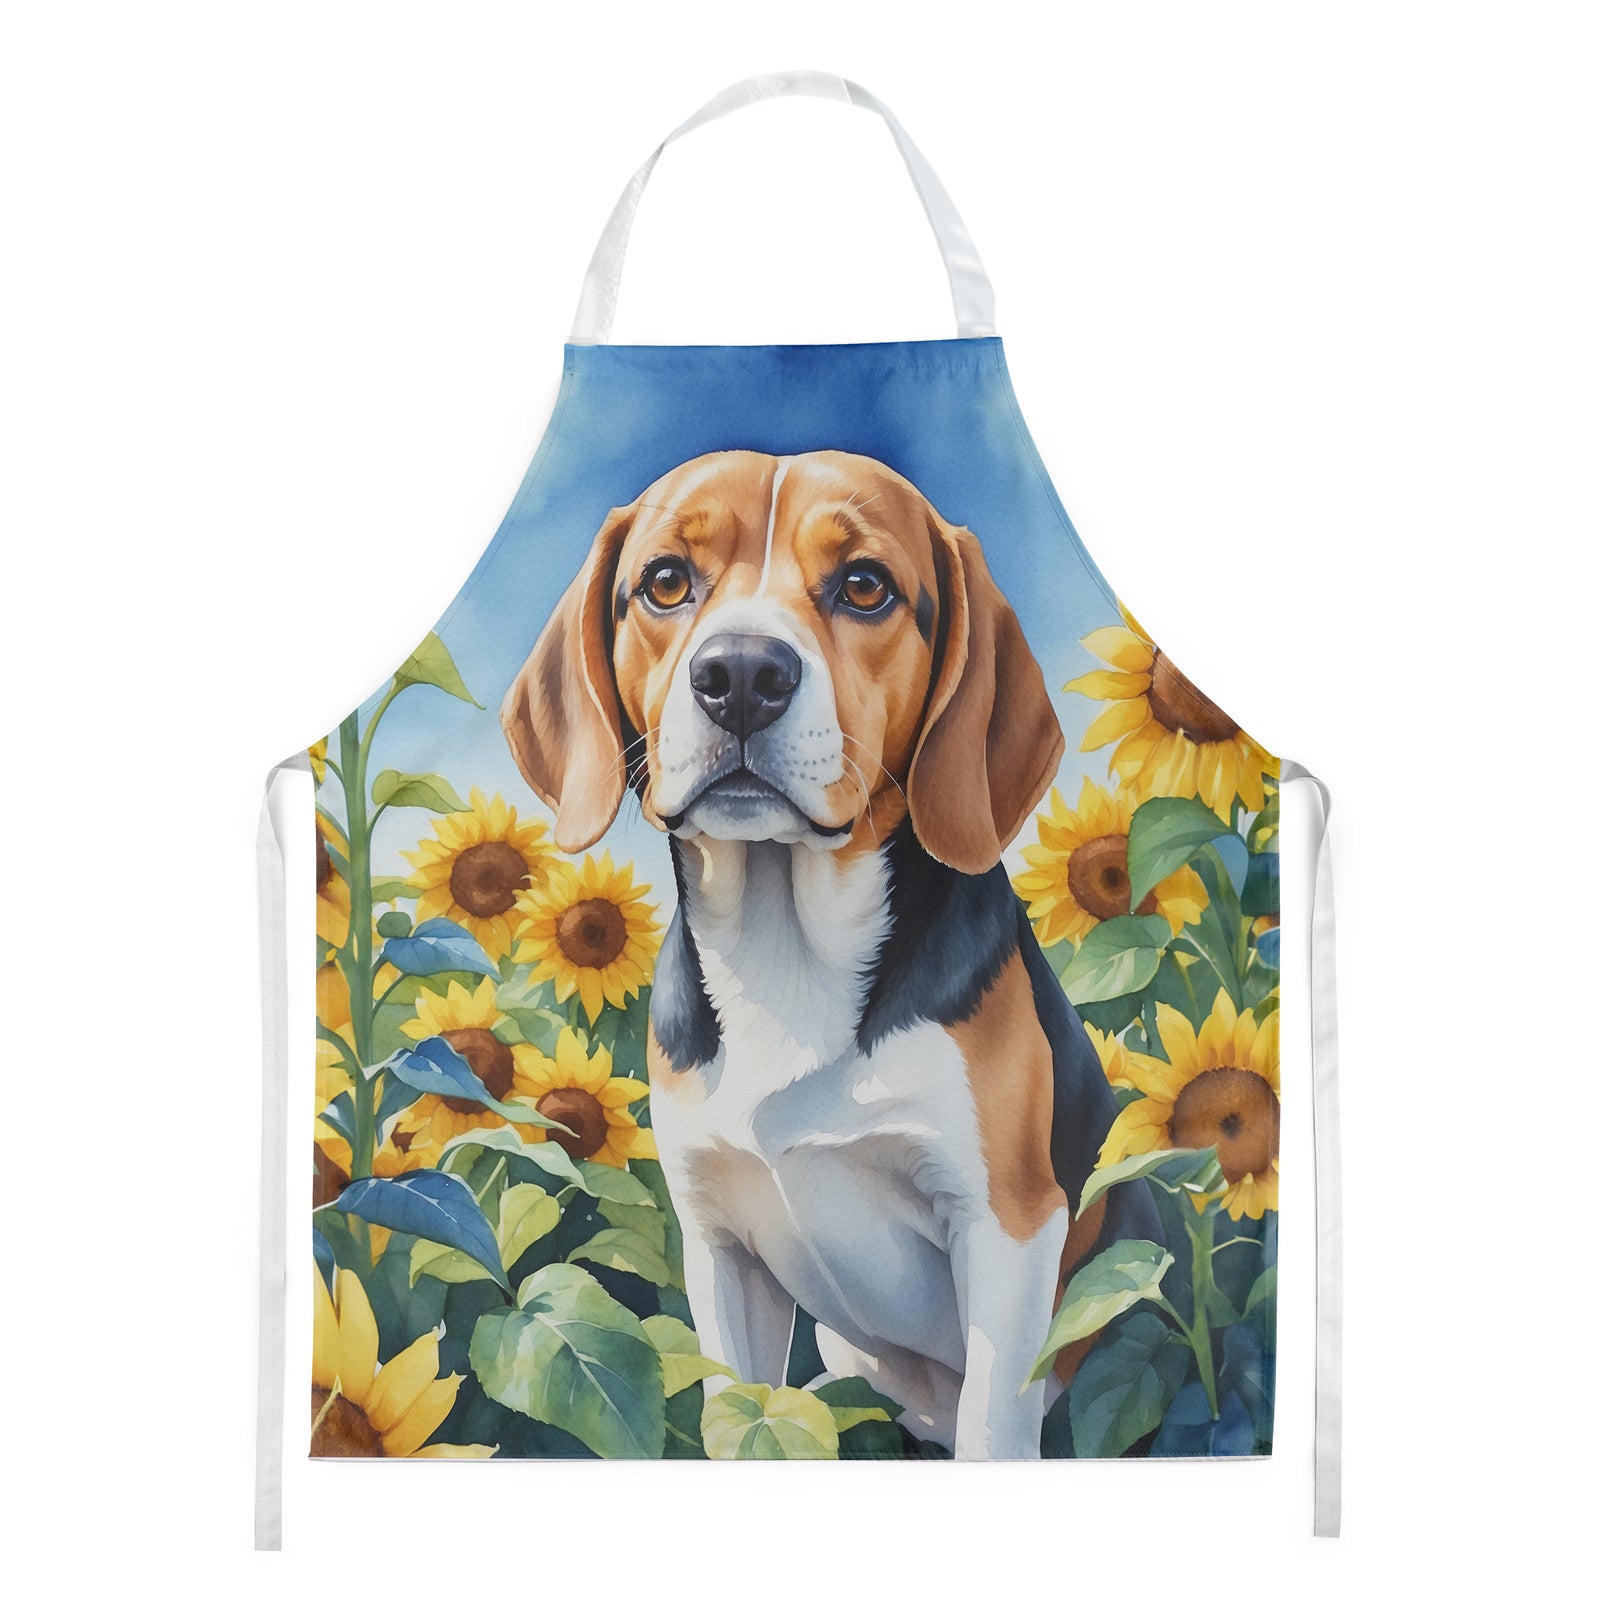 Buy this Beagle in Sunflowers Apron